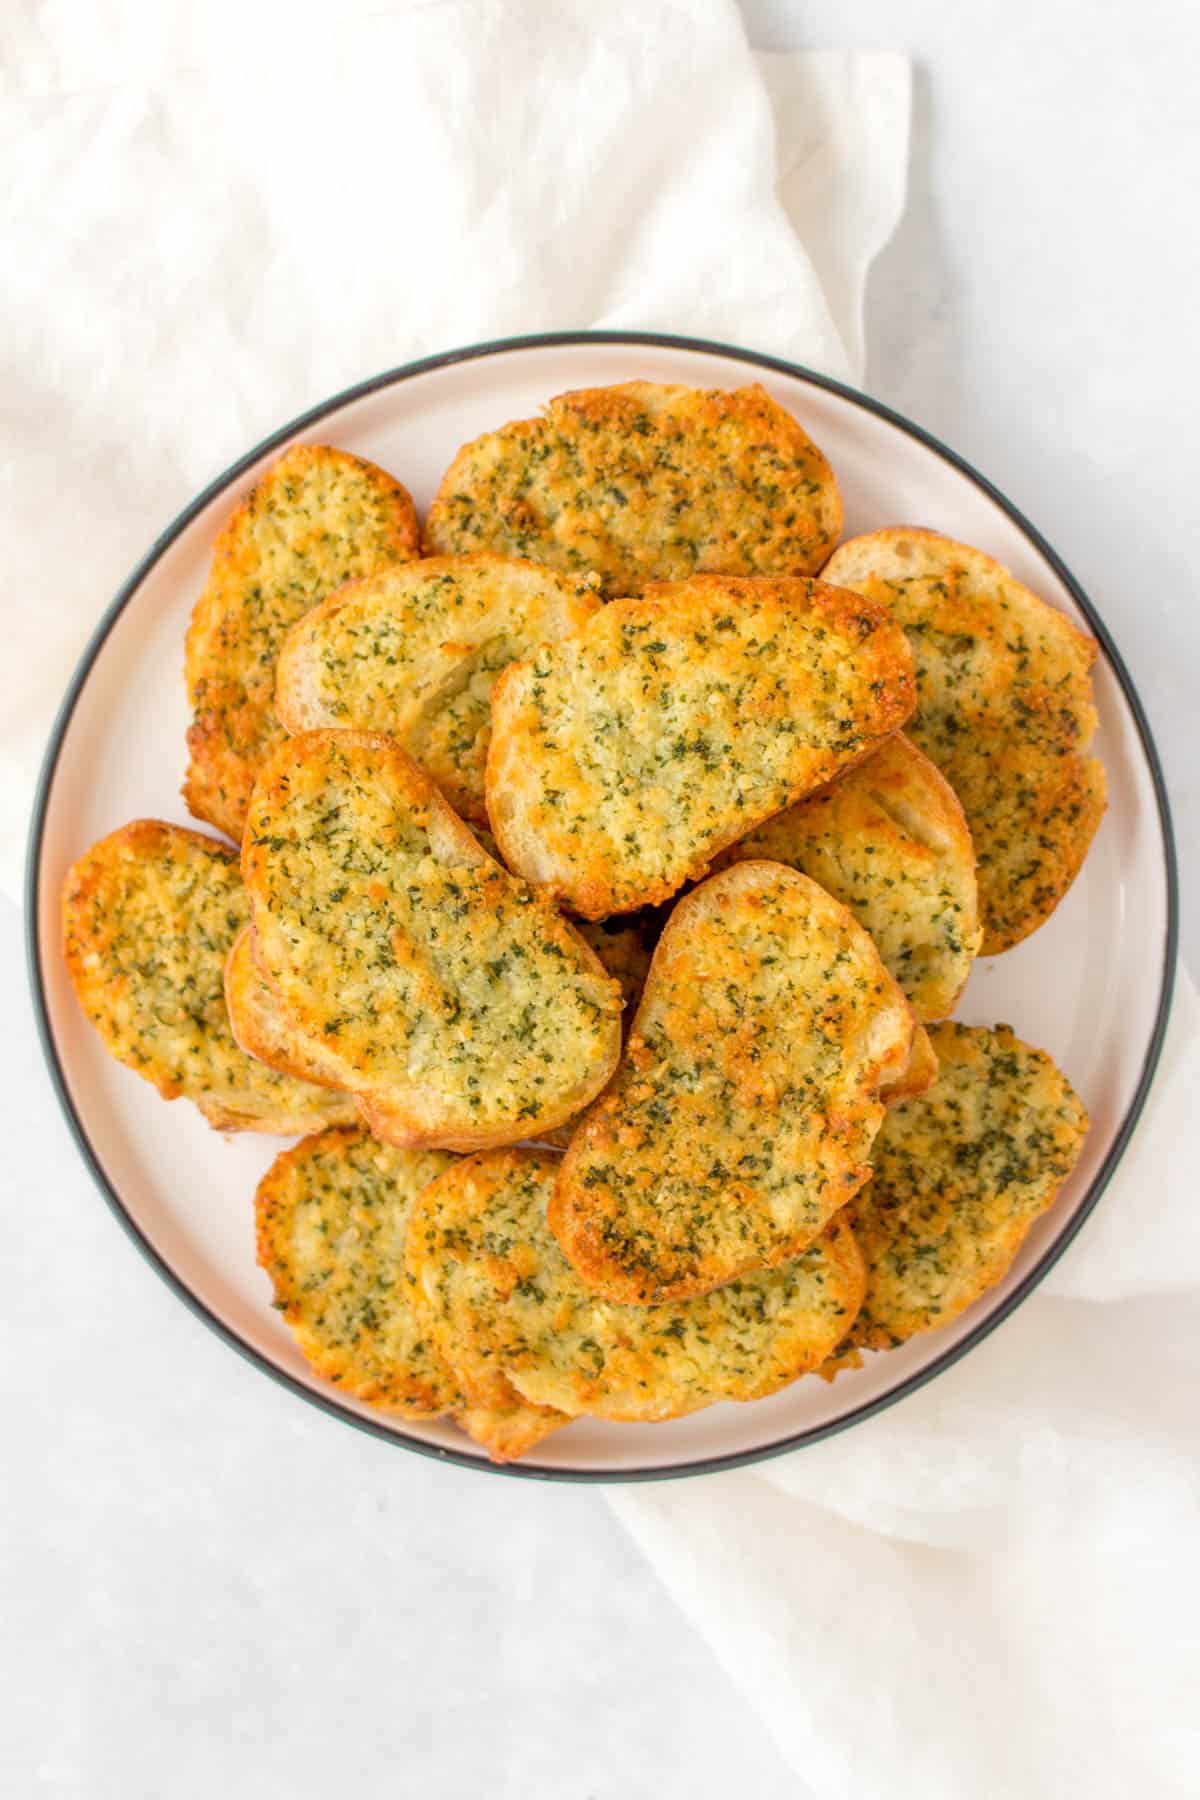 Overhead view of garlic bread on a plate.